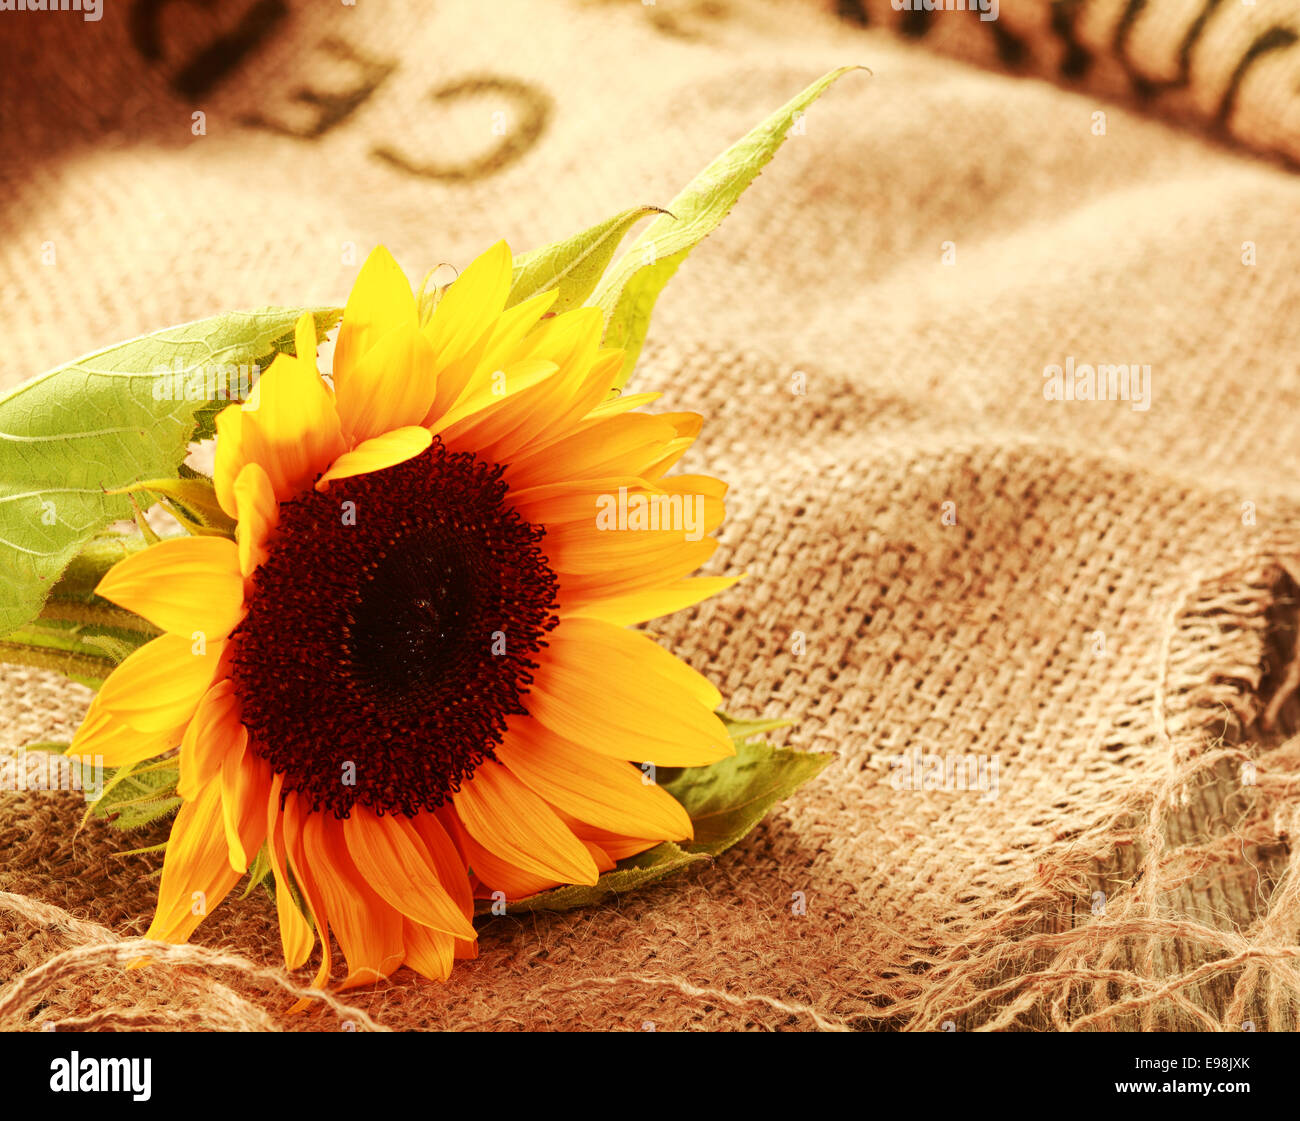 Colorful country background with a bright yellow sunflower lying on a piece of natural fiber woven burlap with copyspace Stock Photo